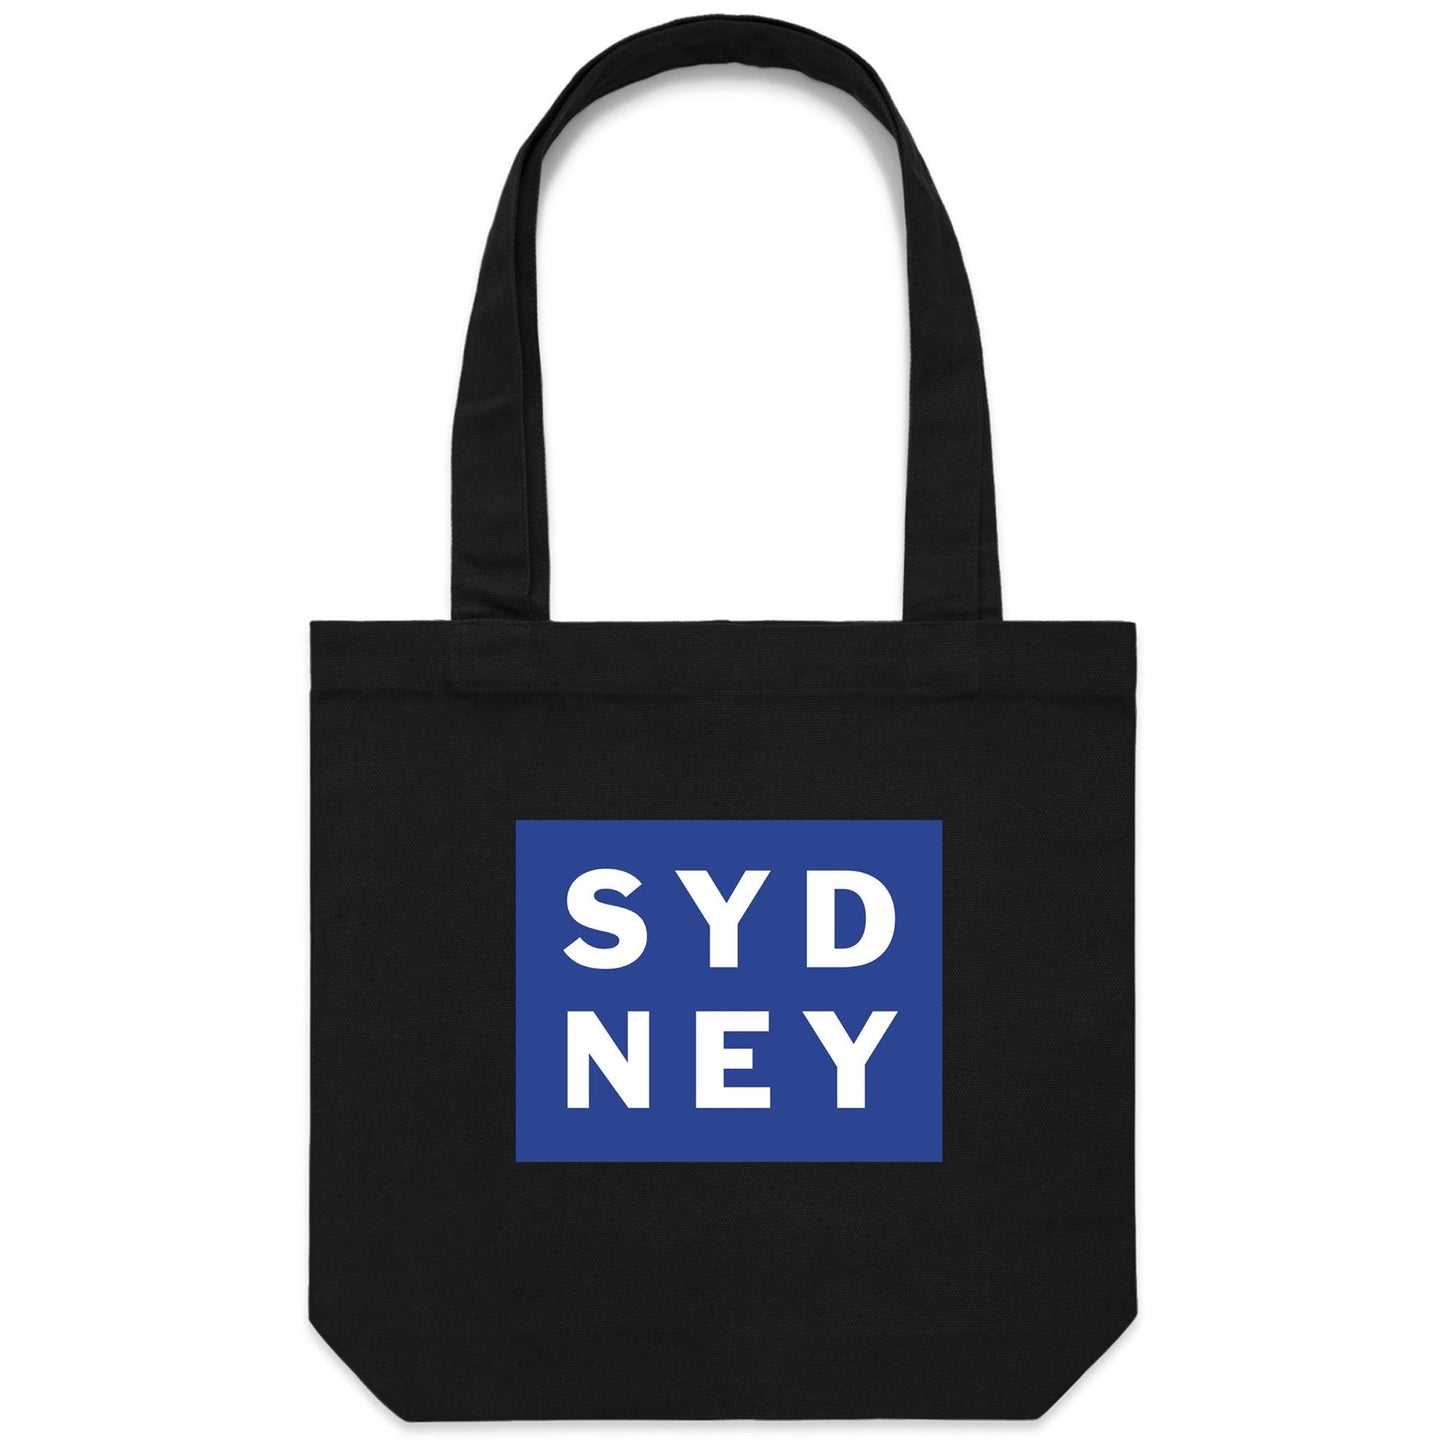 SYD_NEY Canvas Totes